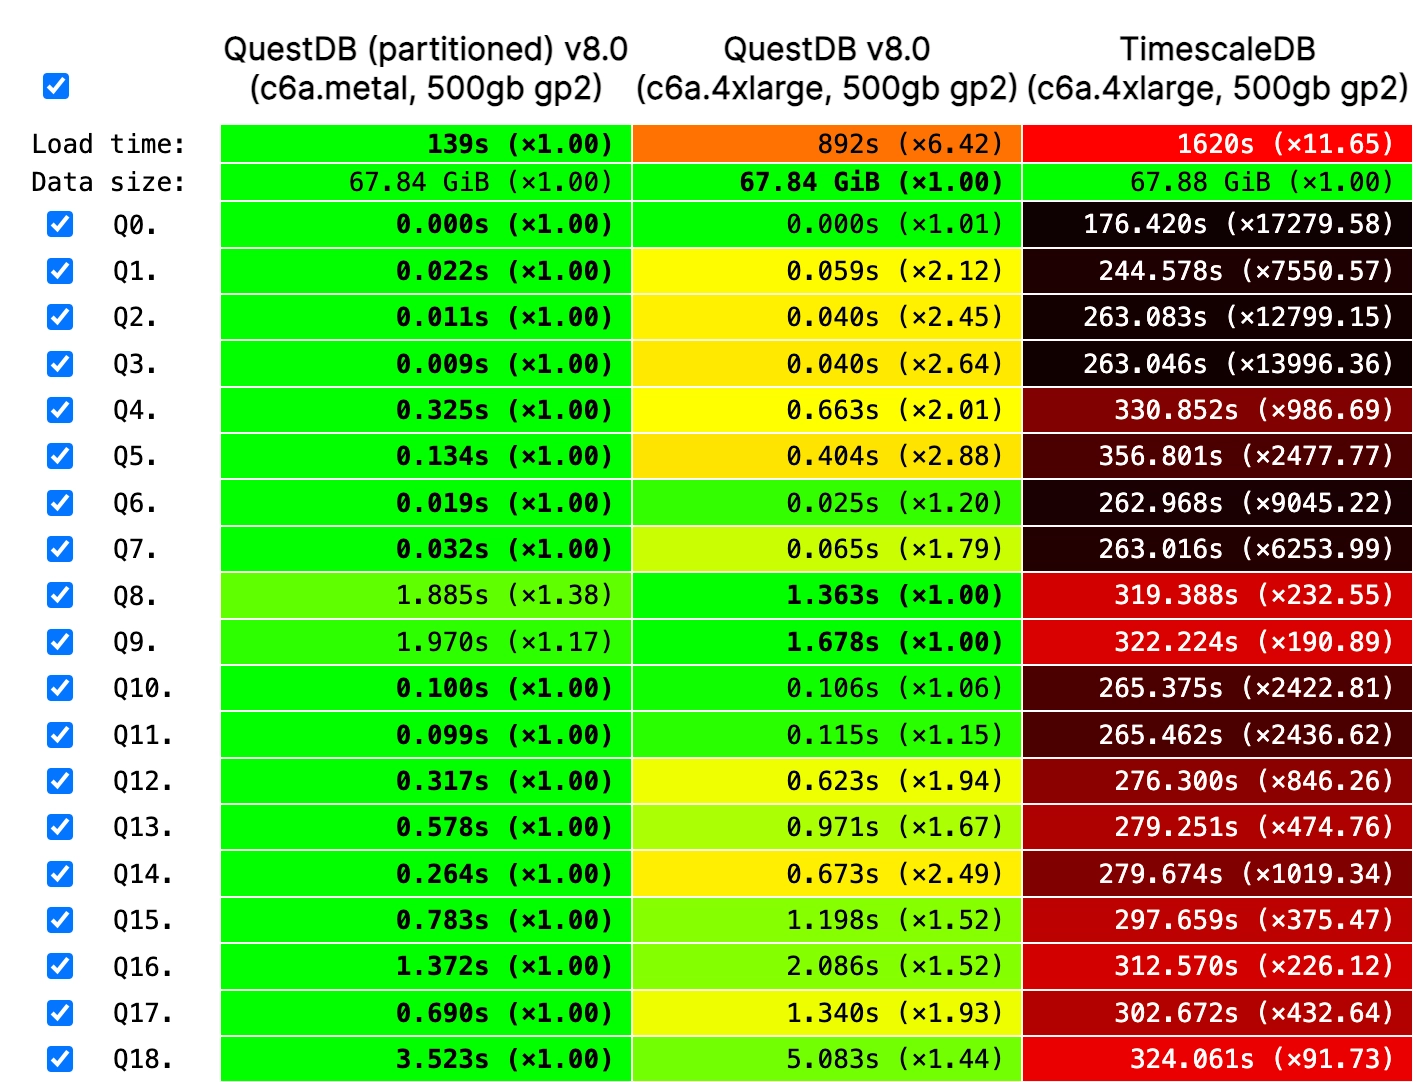 A picture of QuestDB out-performing TimescaleDB by many
multiples in most queries.